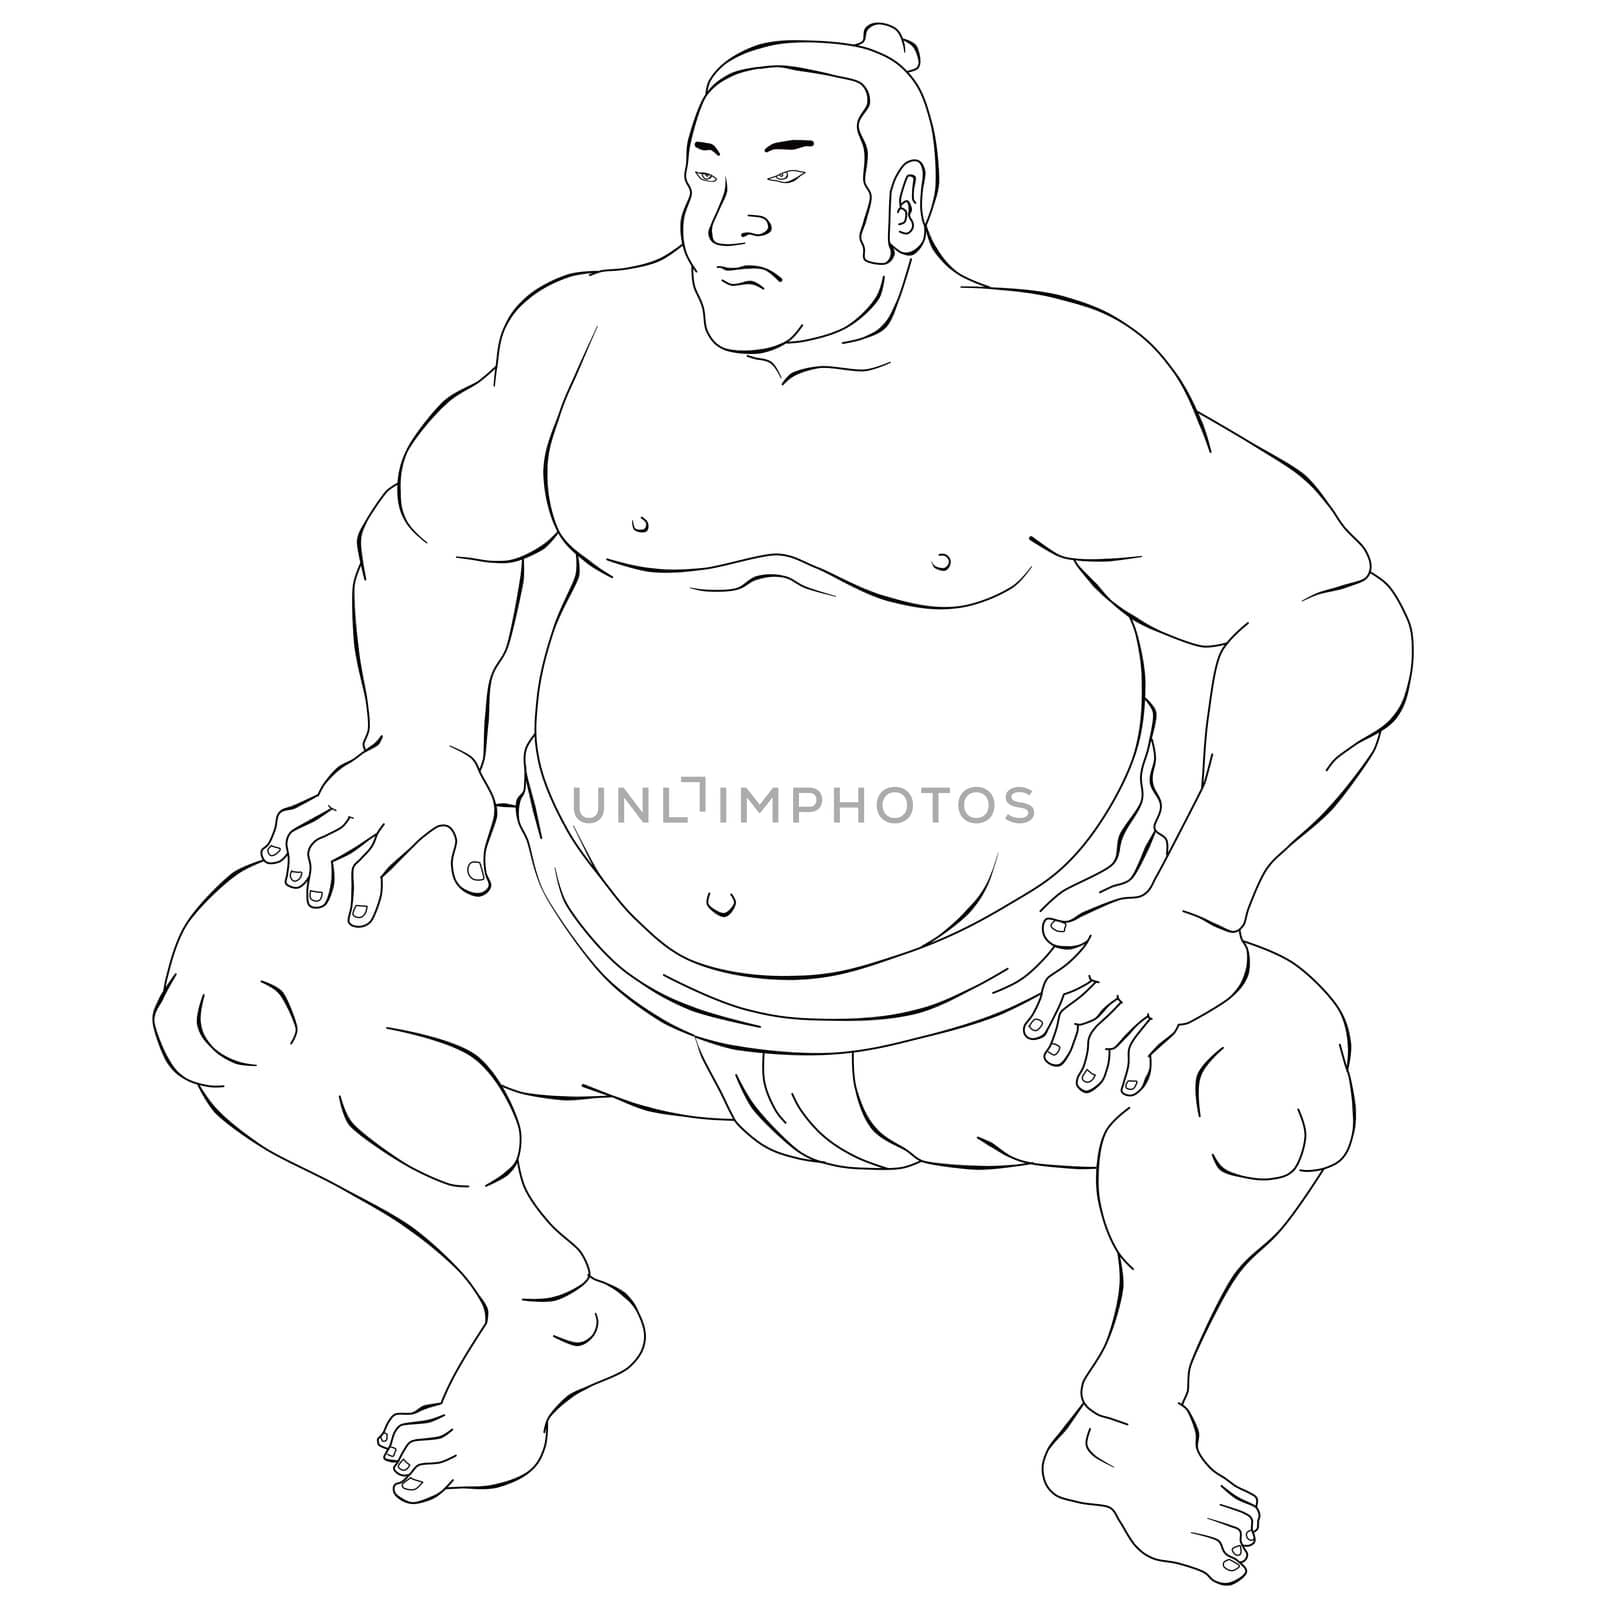 illustration of a Japanese sumo wrestler done in black and white cartoon style on isolated on white background